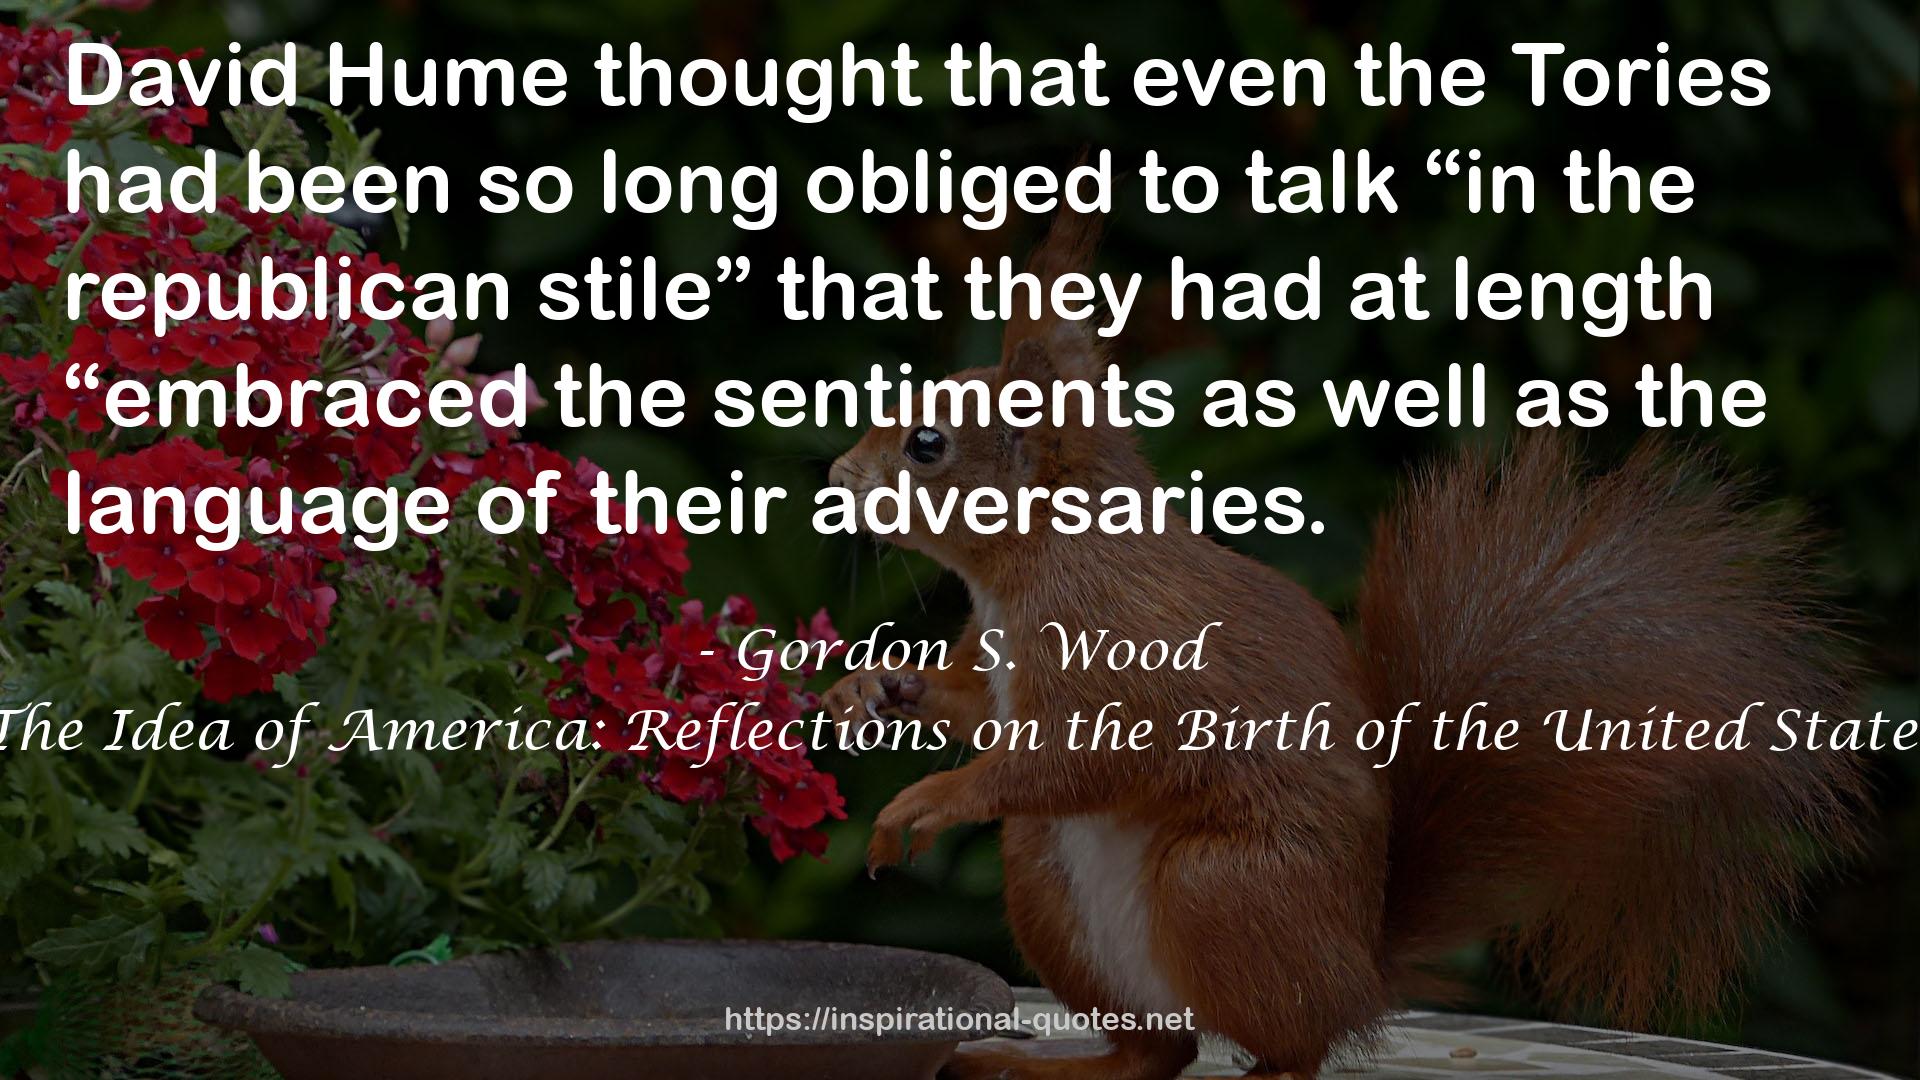 The Idea of America: Reflections on the Birth of the United States QUOTES